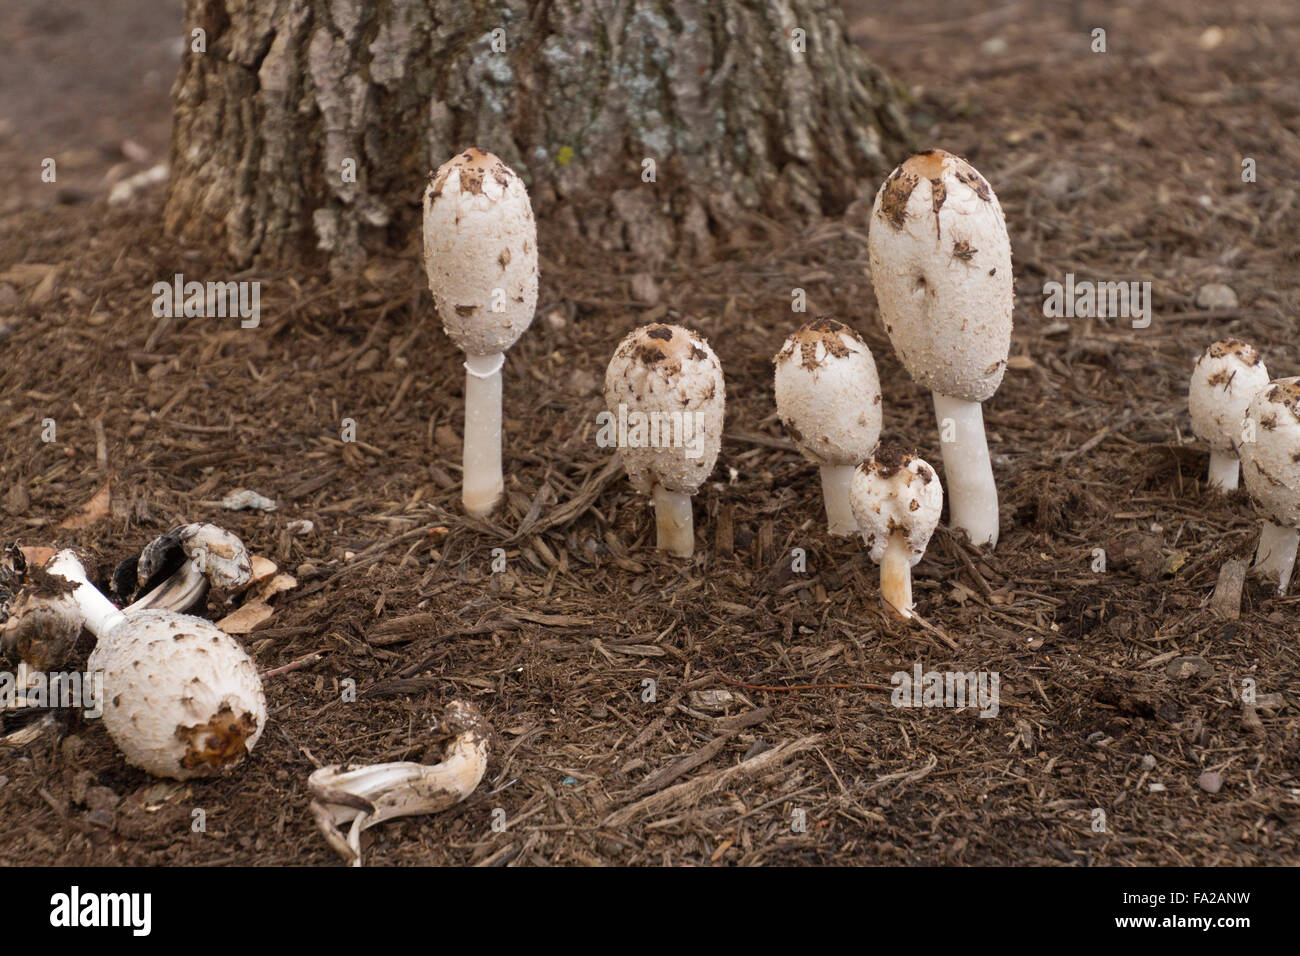 Close up of black, white and tan Shaggy Mane Mushrooms ( also called Lawyer's Wig Mushrooms) growing wild Stock Photo